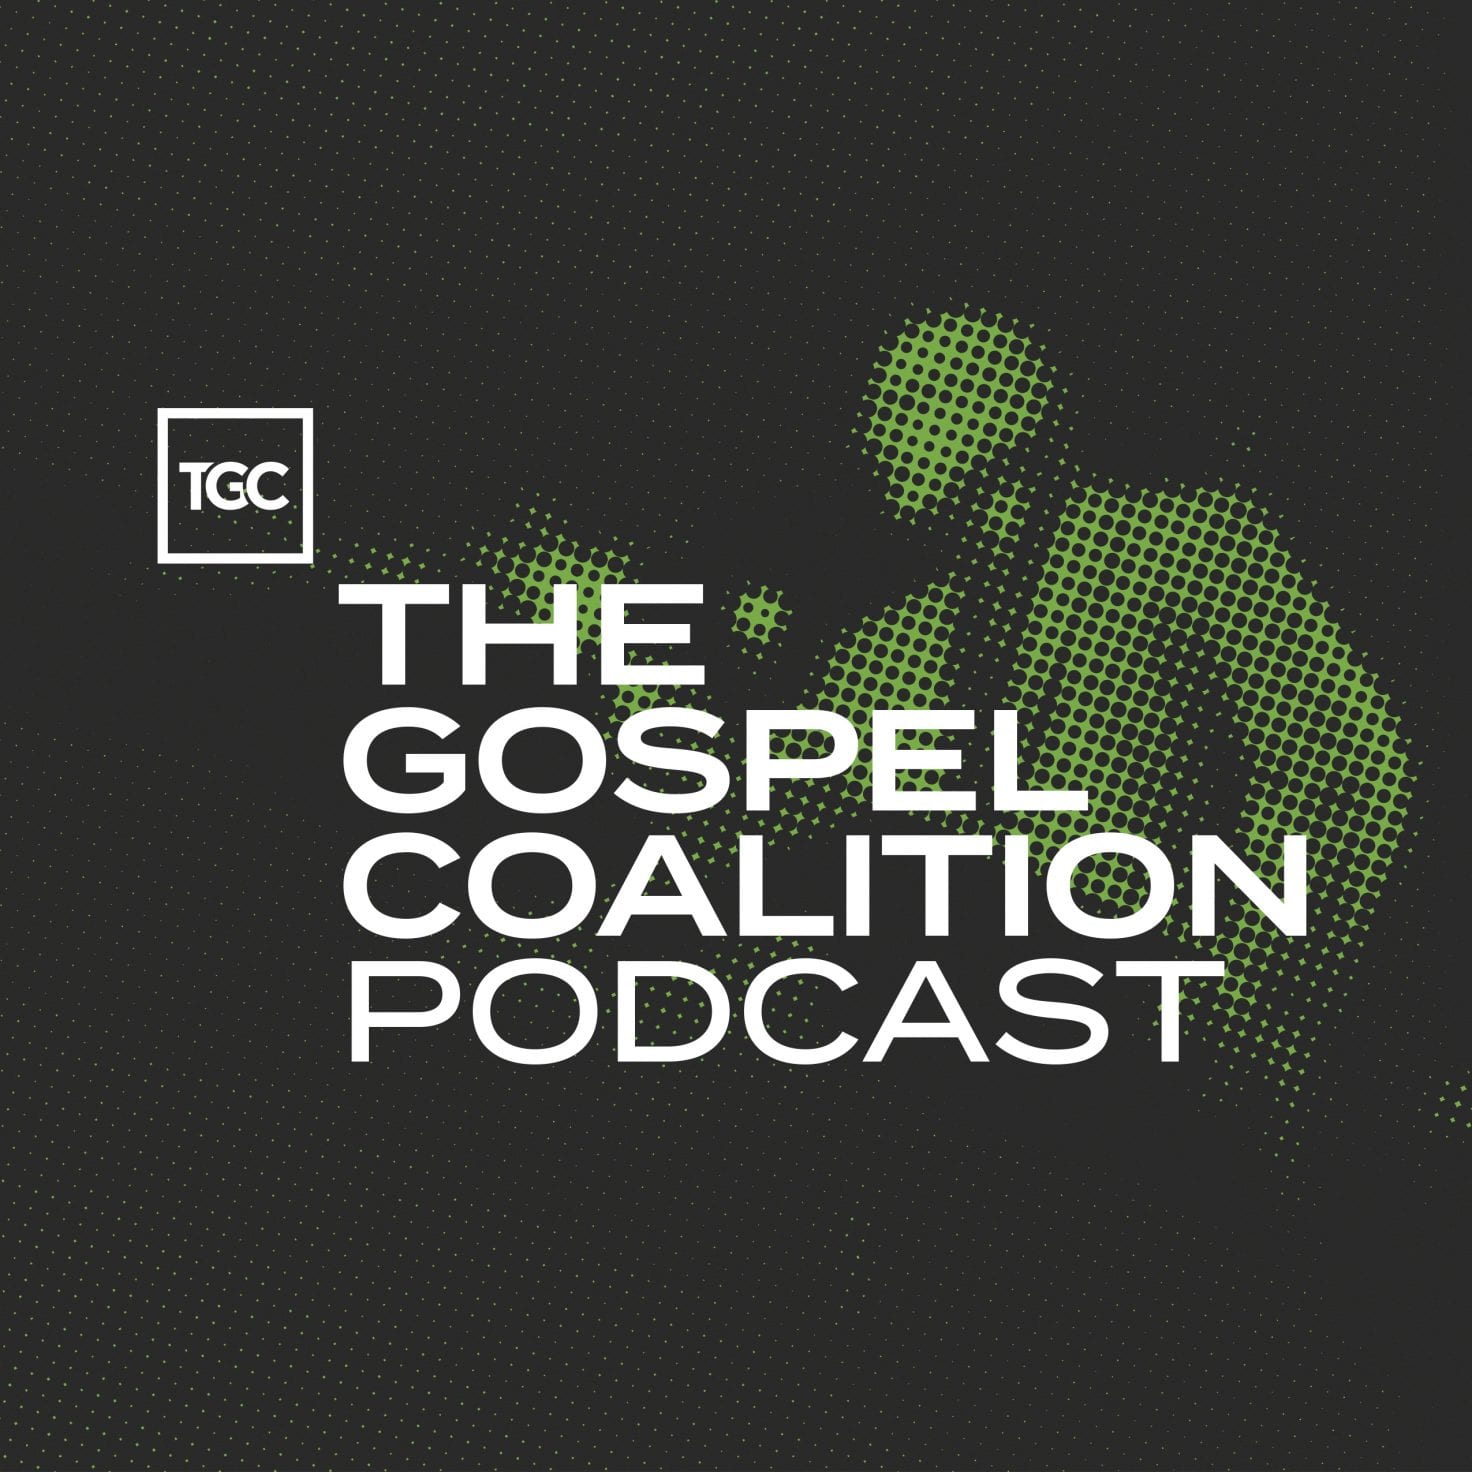 The Gospel Coalition Podcasts